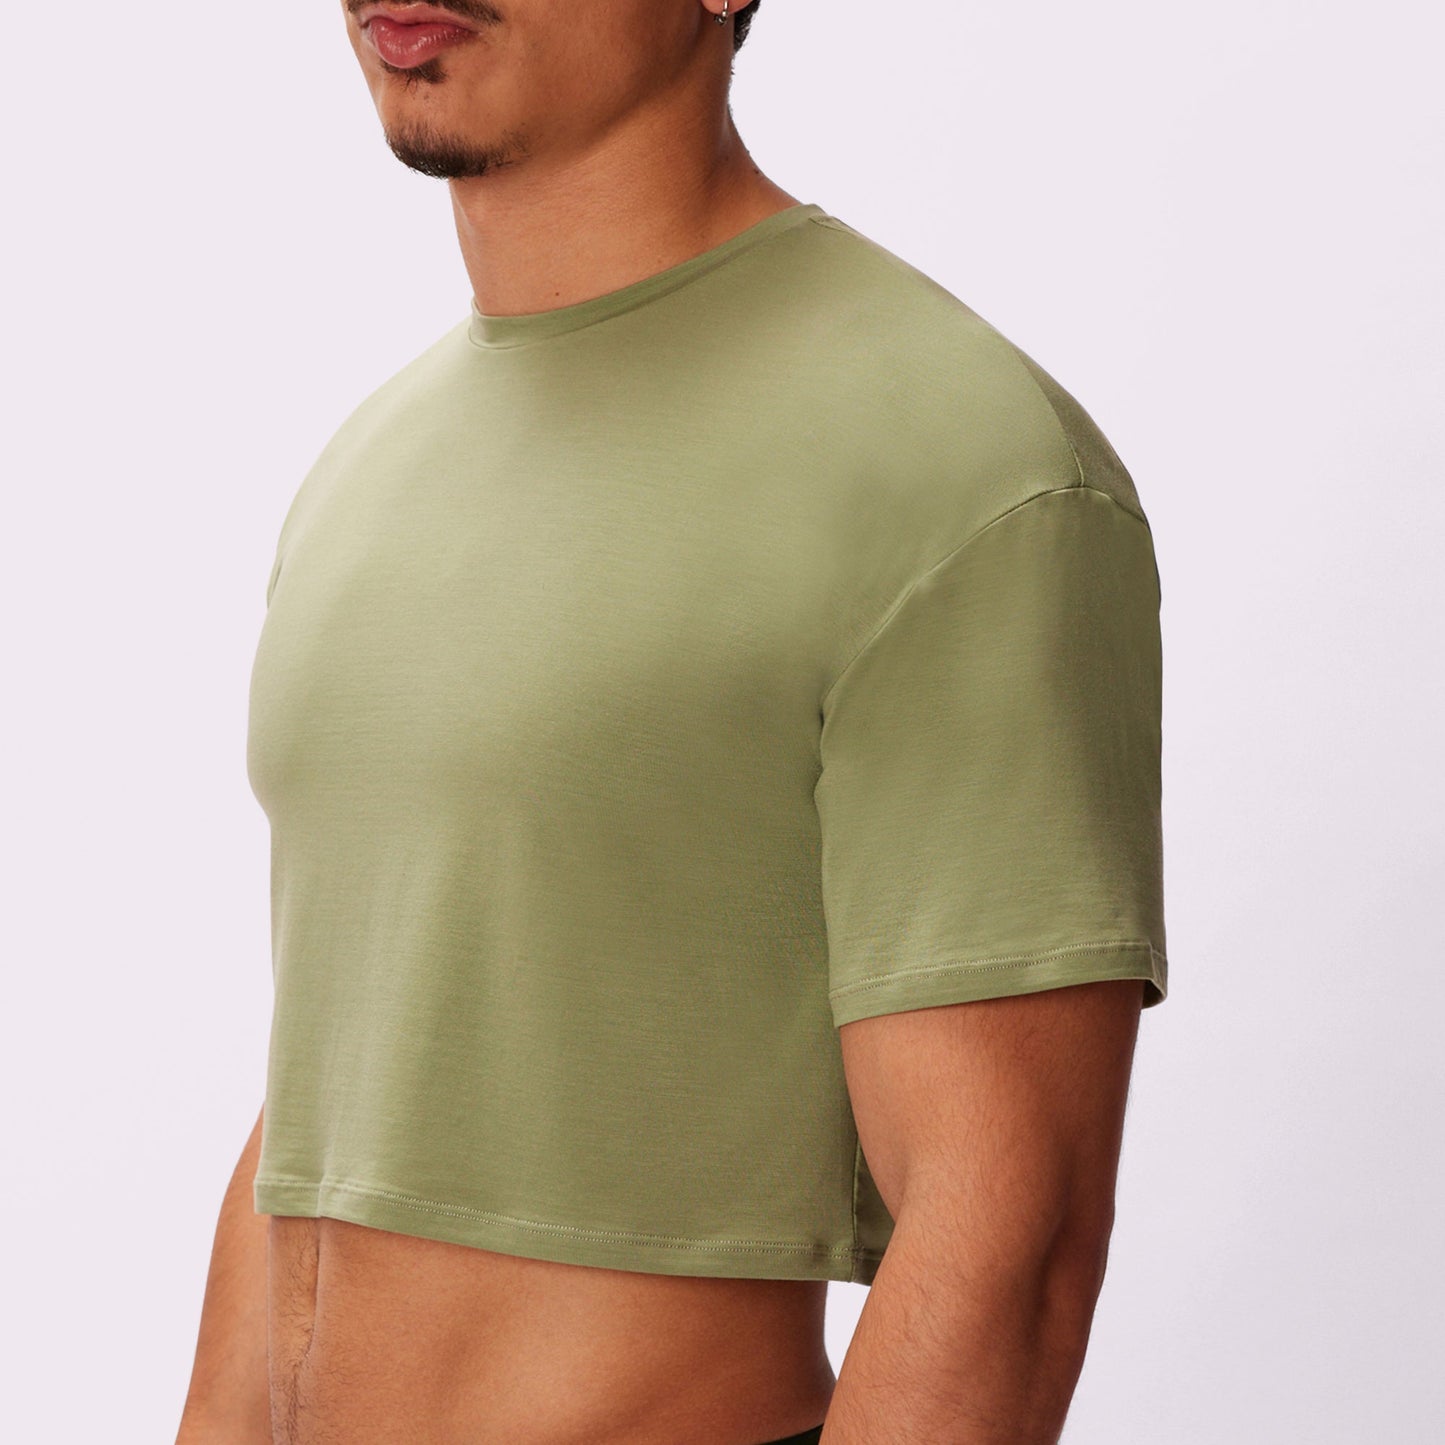 Breezy Crop Tee | New:Cotton | Archive (Olive)